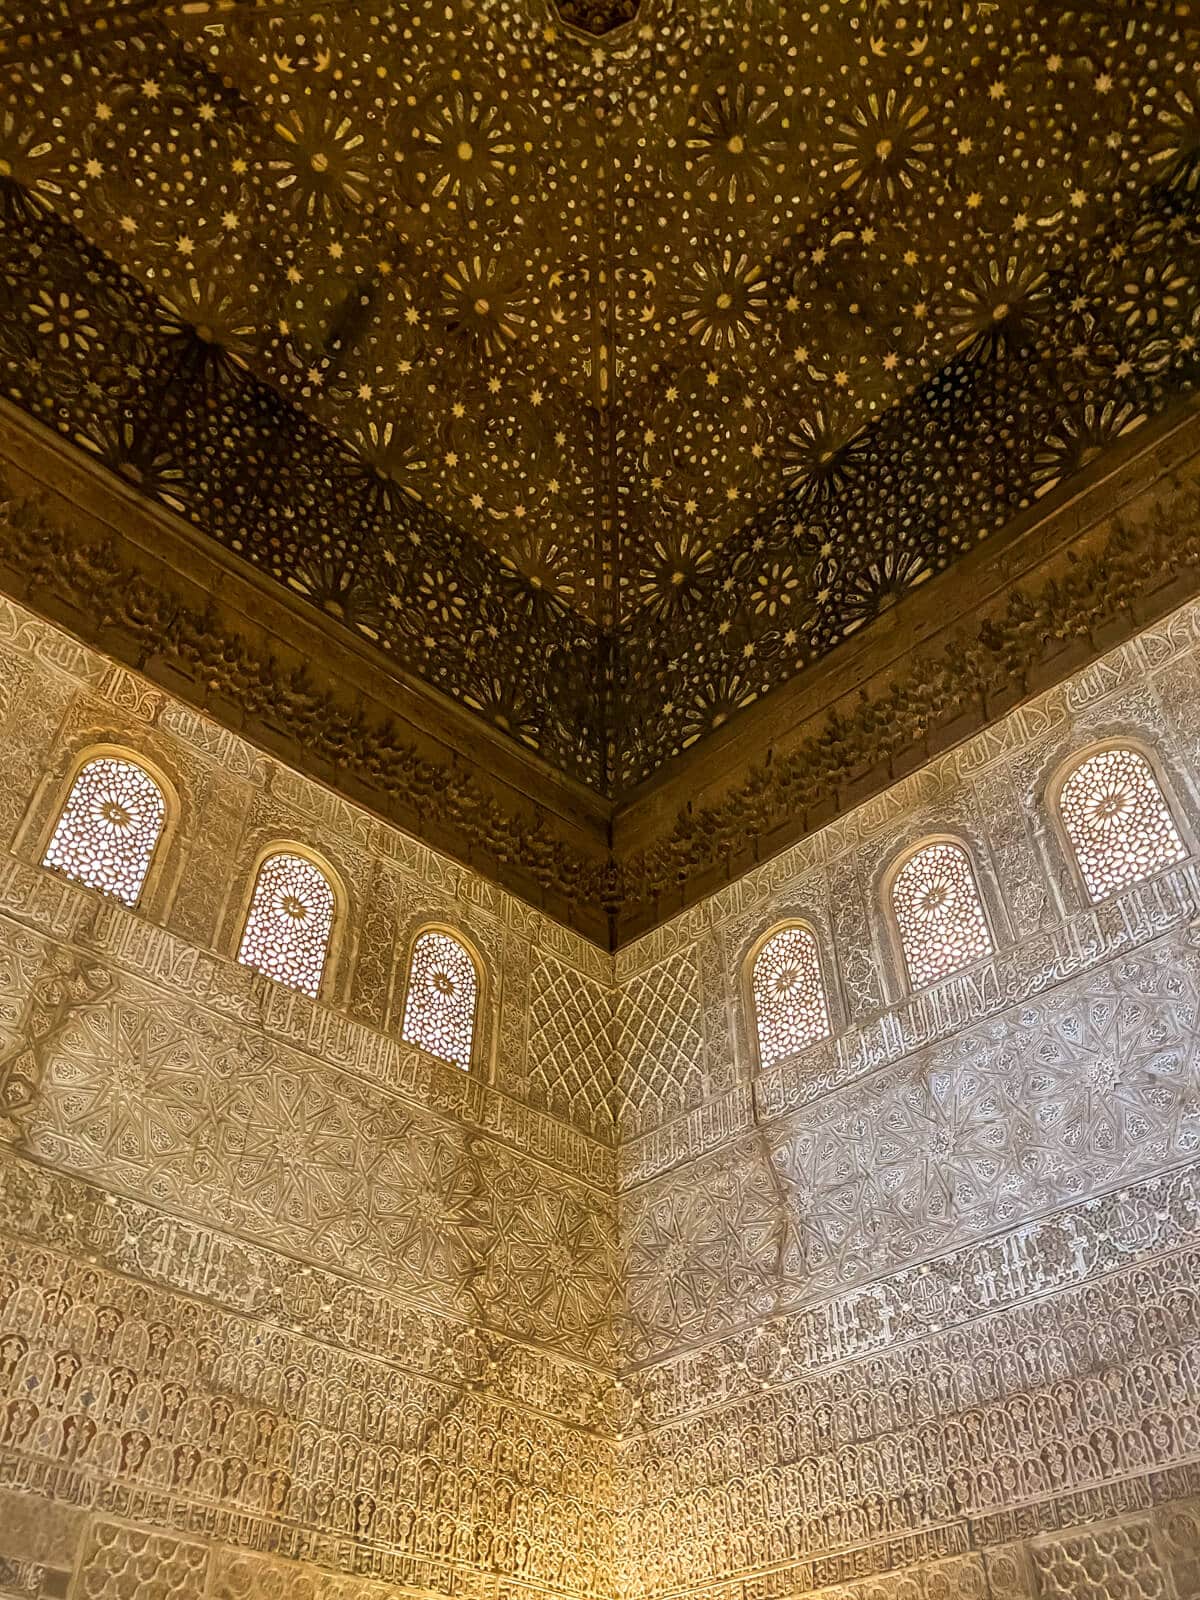 decorative ceiling inside the nasrid palaces